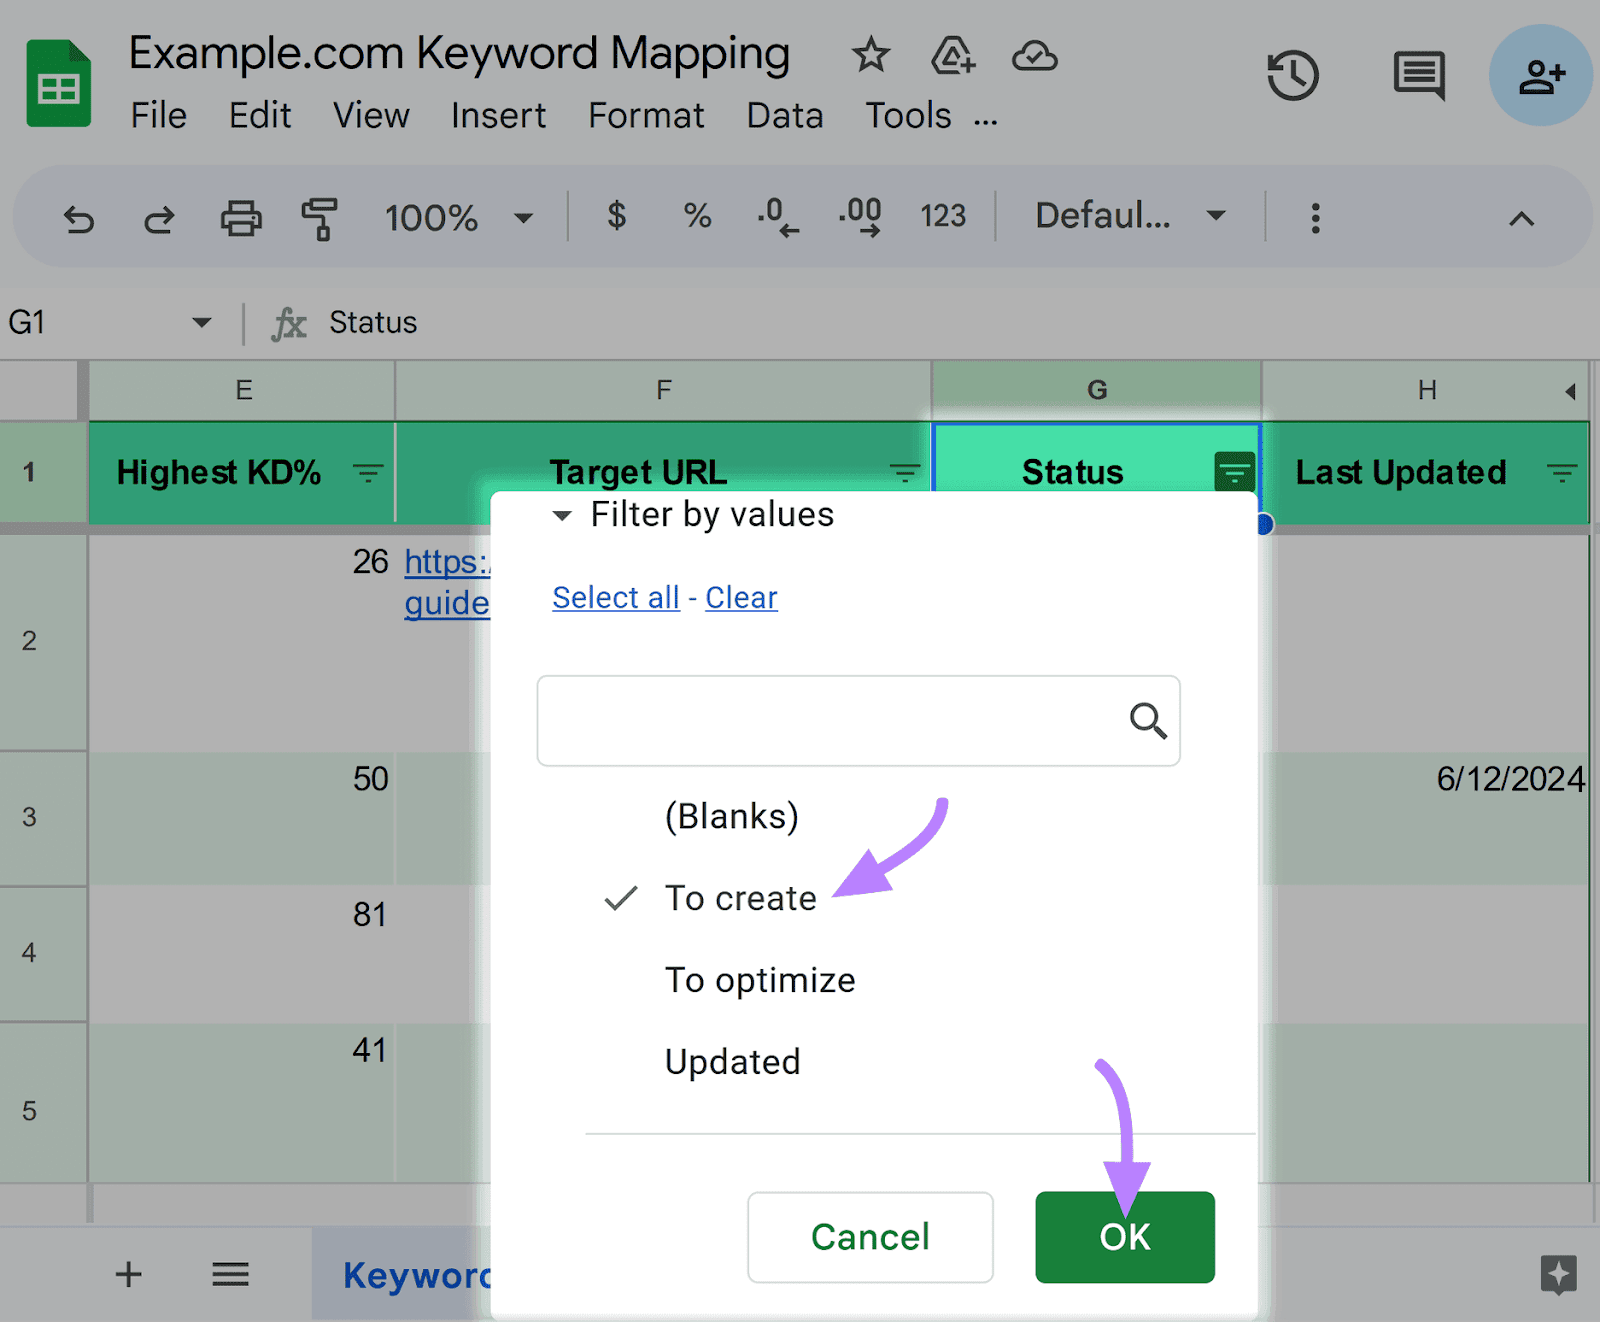 Keyword mapping template section displaying filtering of the "Status" column to show results flagged "To create."